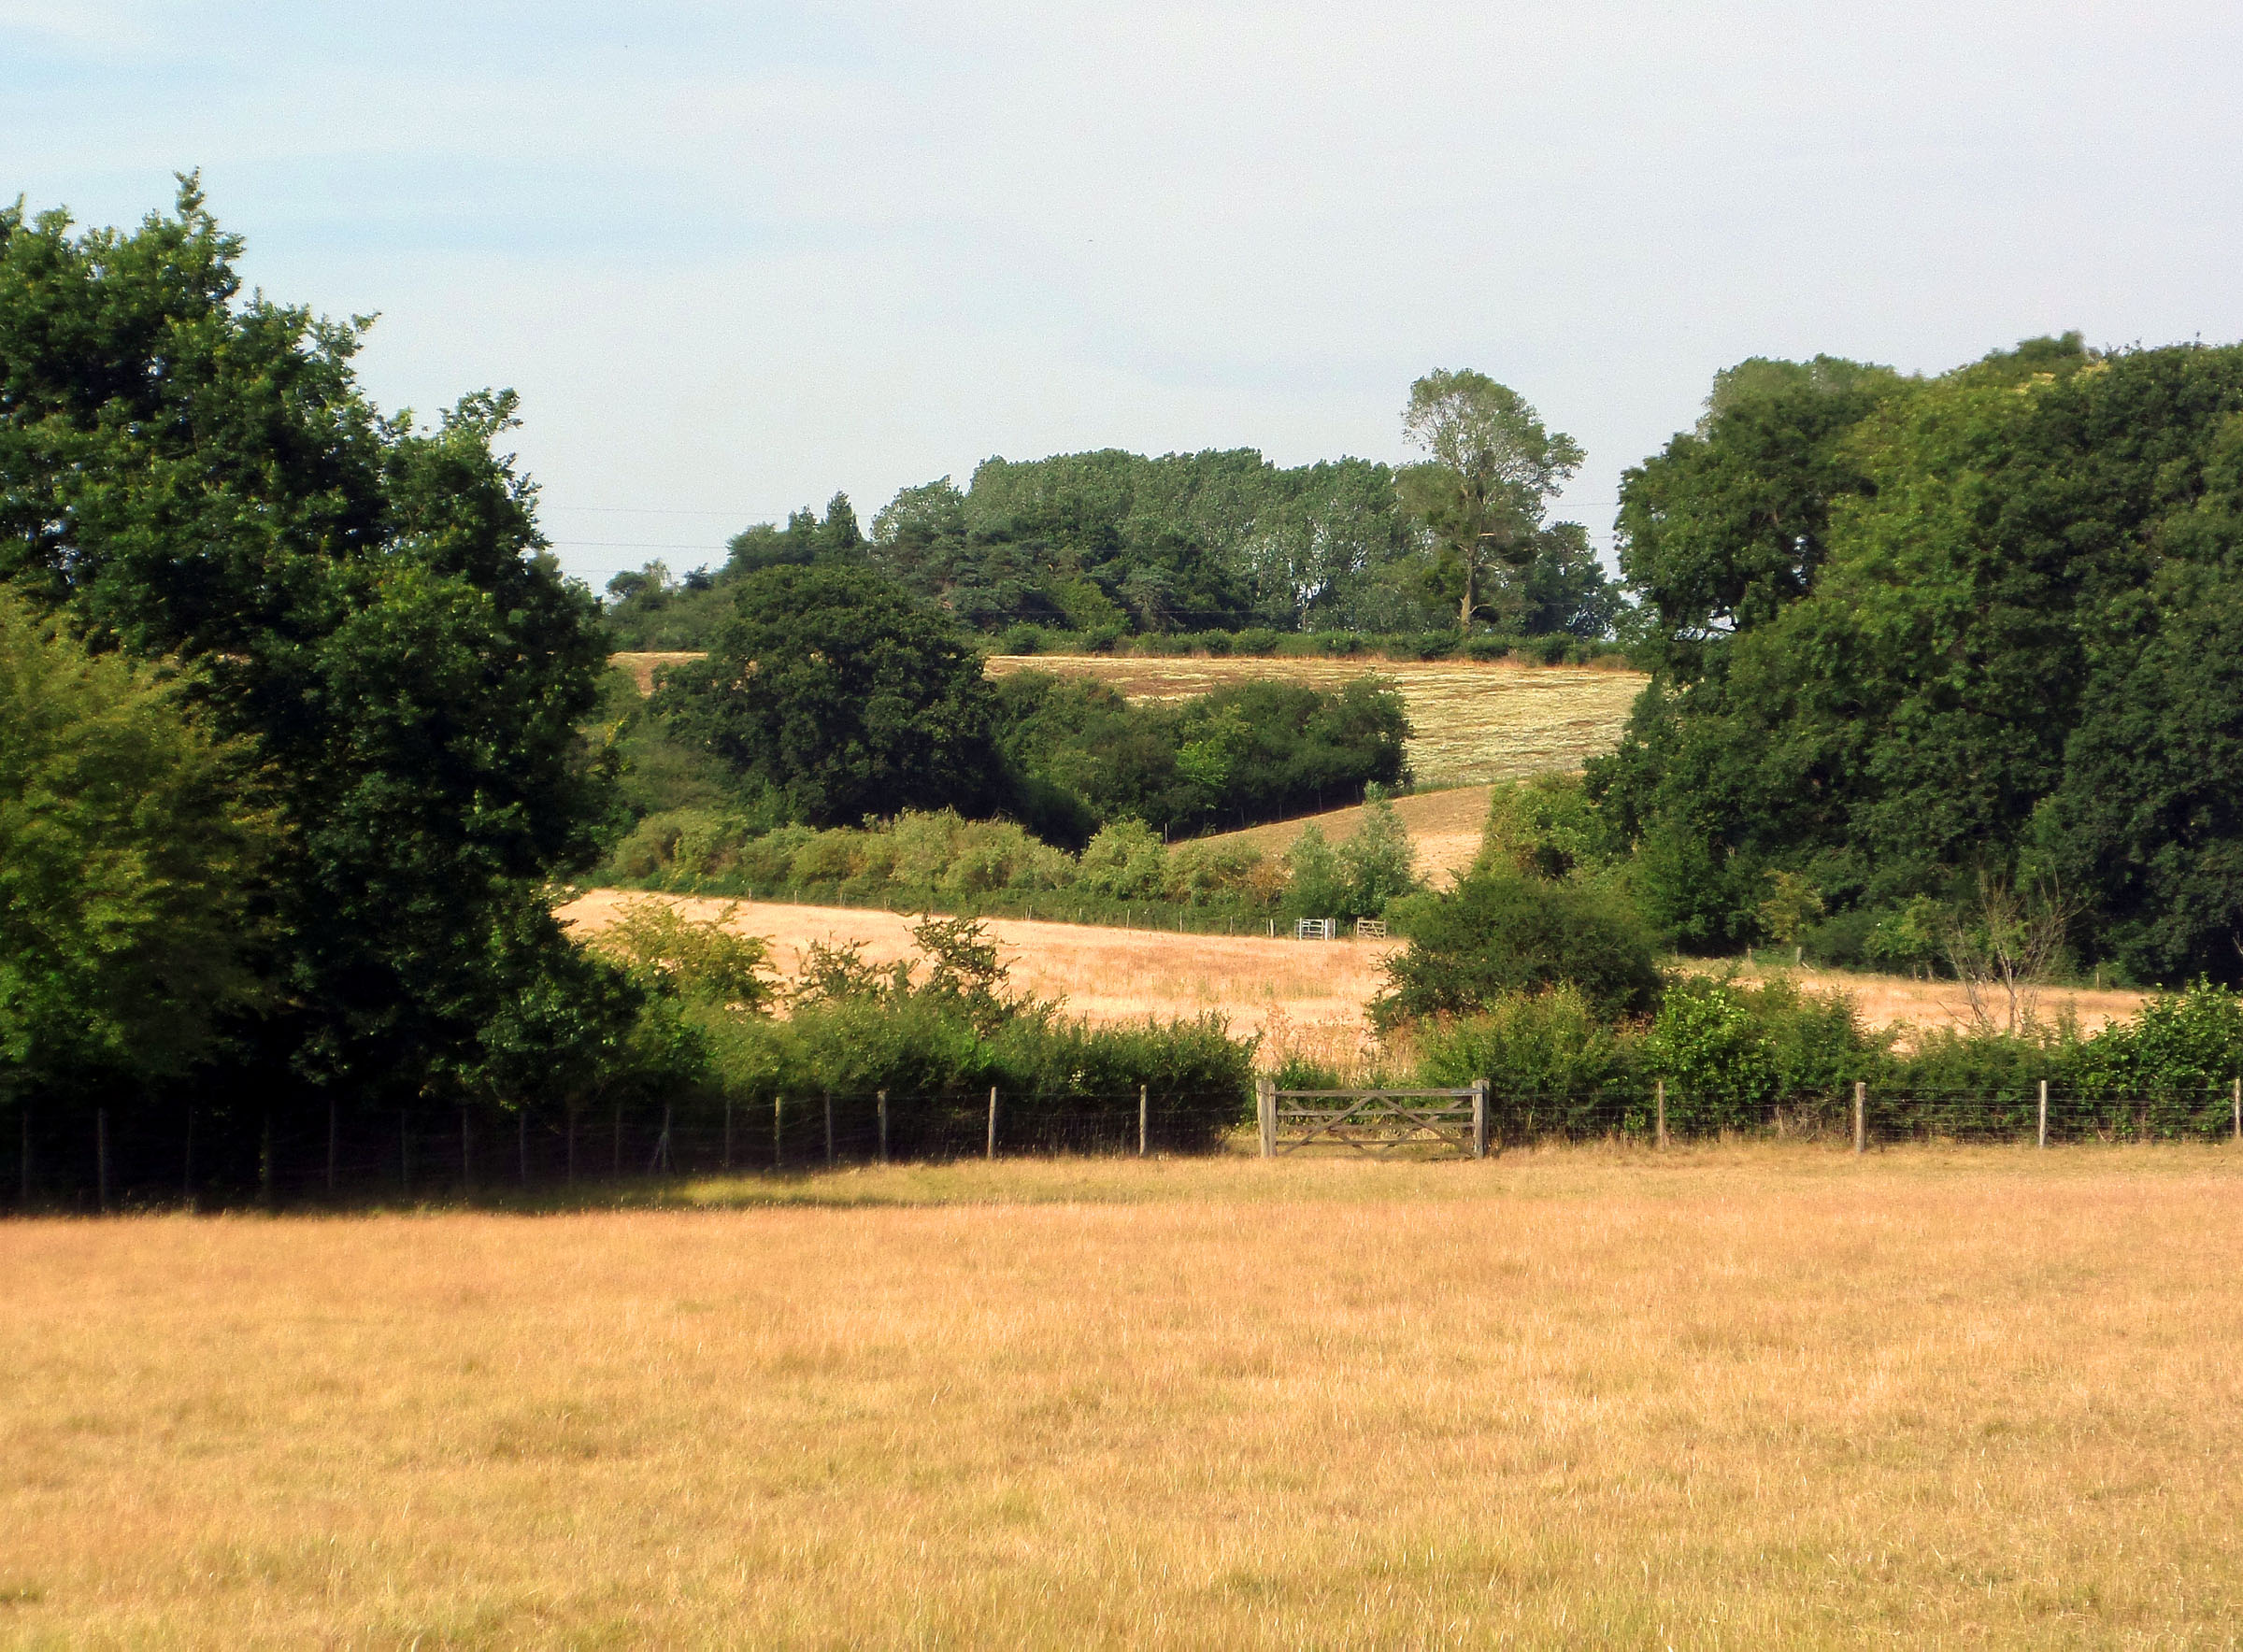 English fields and trees - suffolk photo